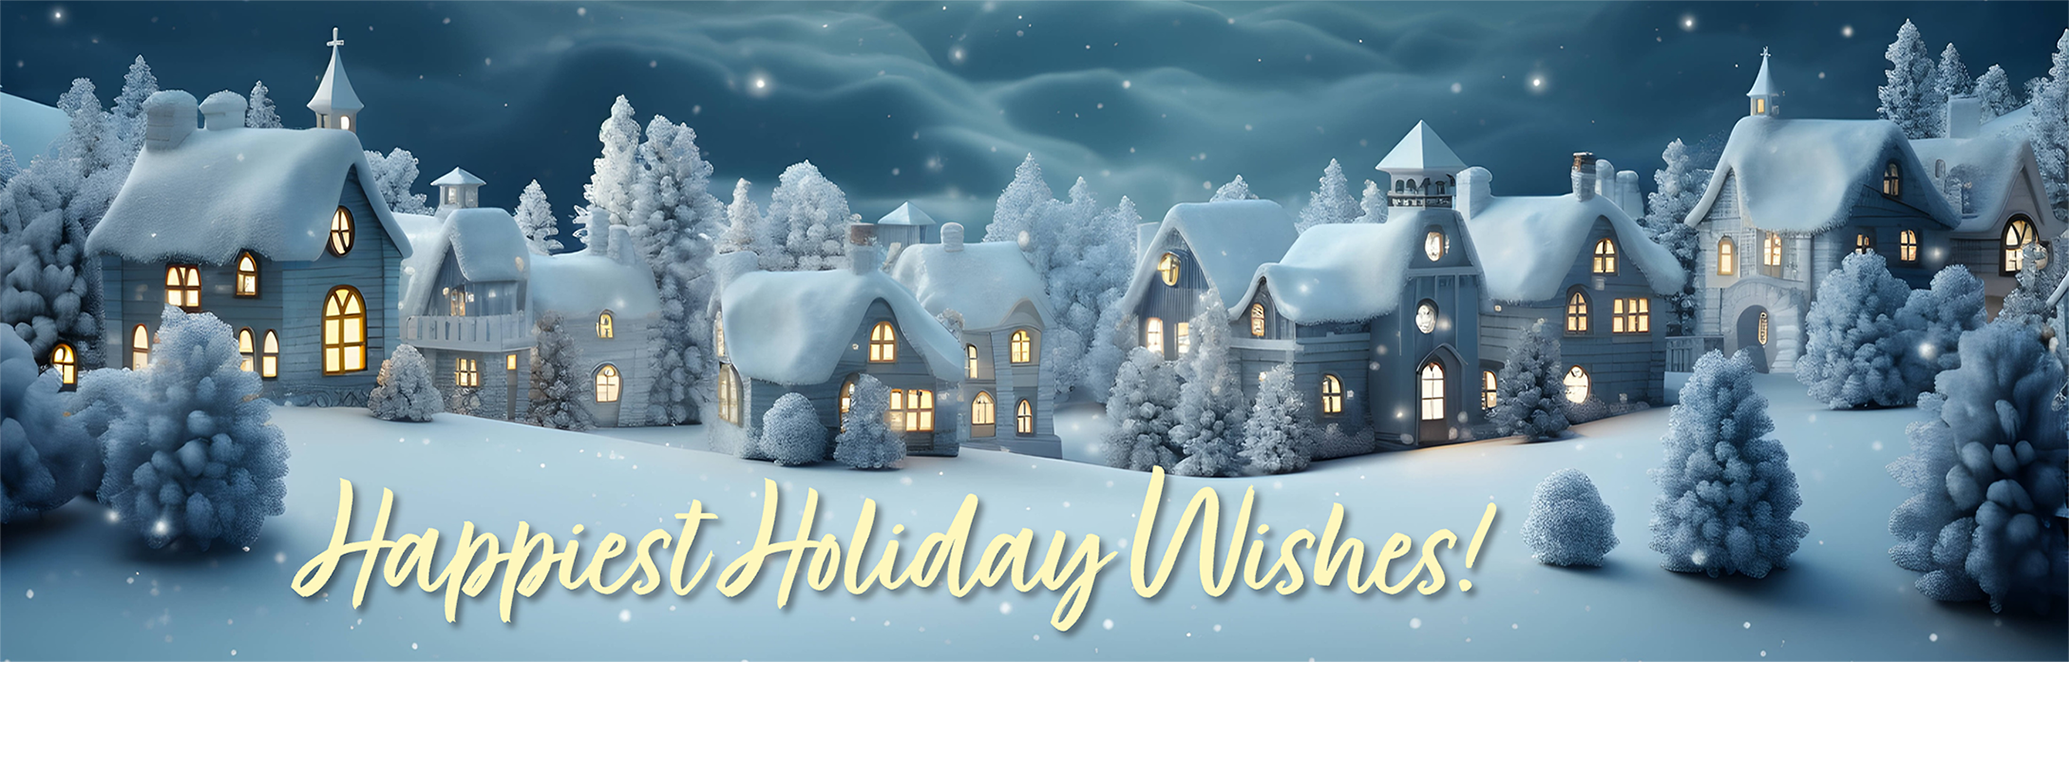 snowy village scene "Happiest Holiday Wishes"